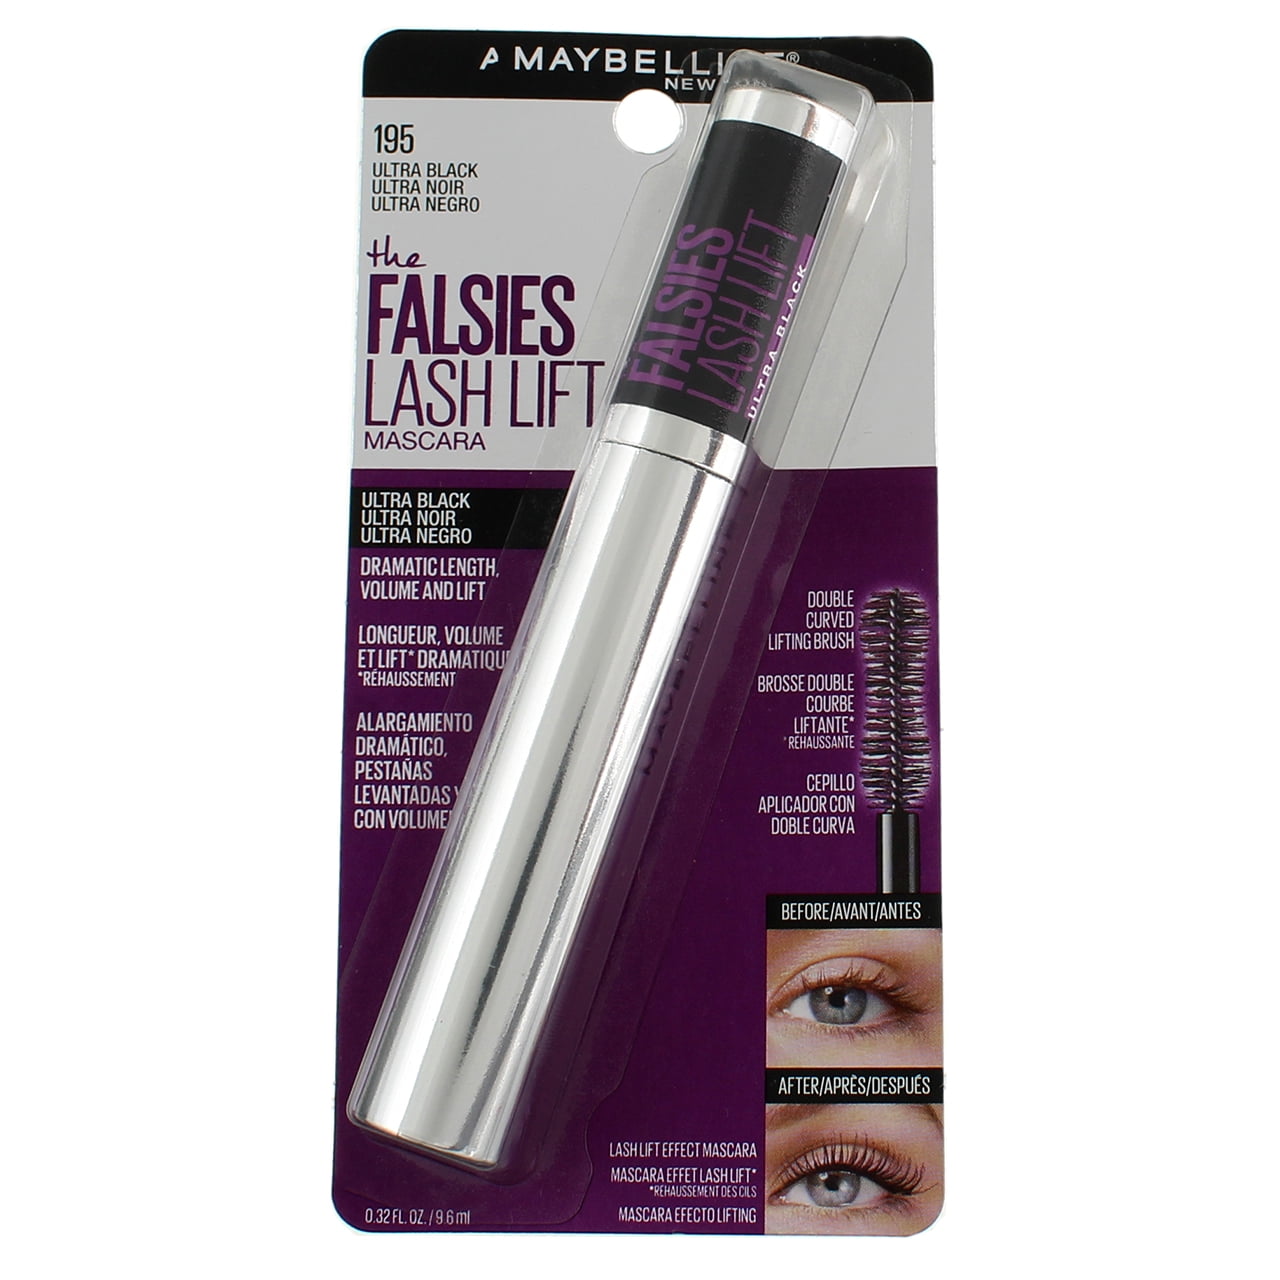 How Much is Maybelline Falsies Mascara? 2